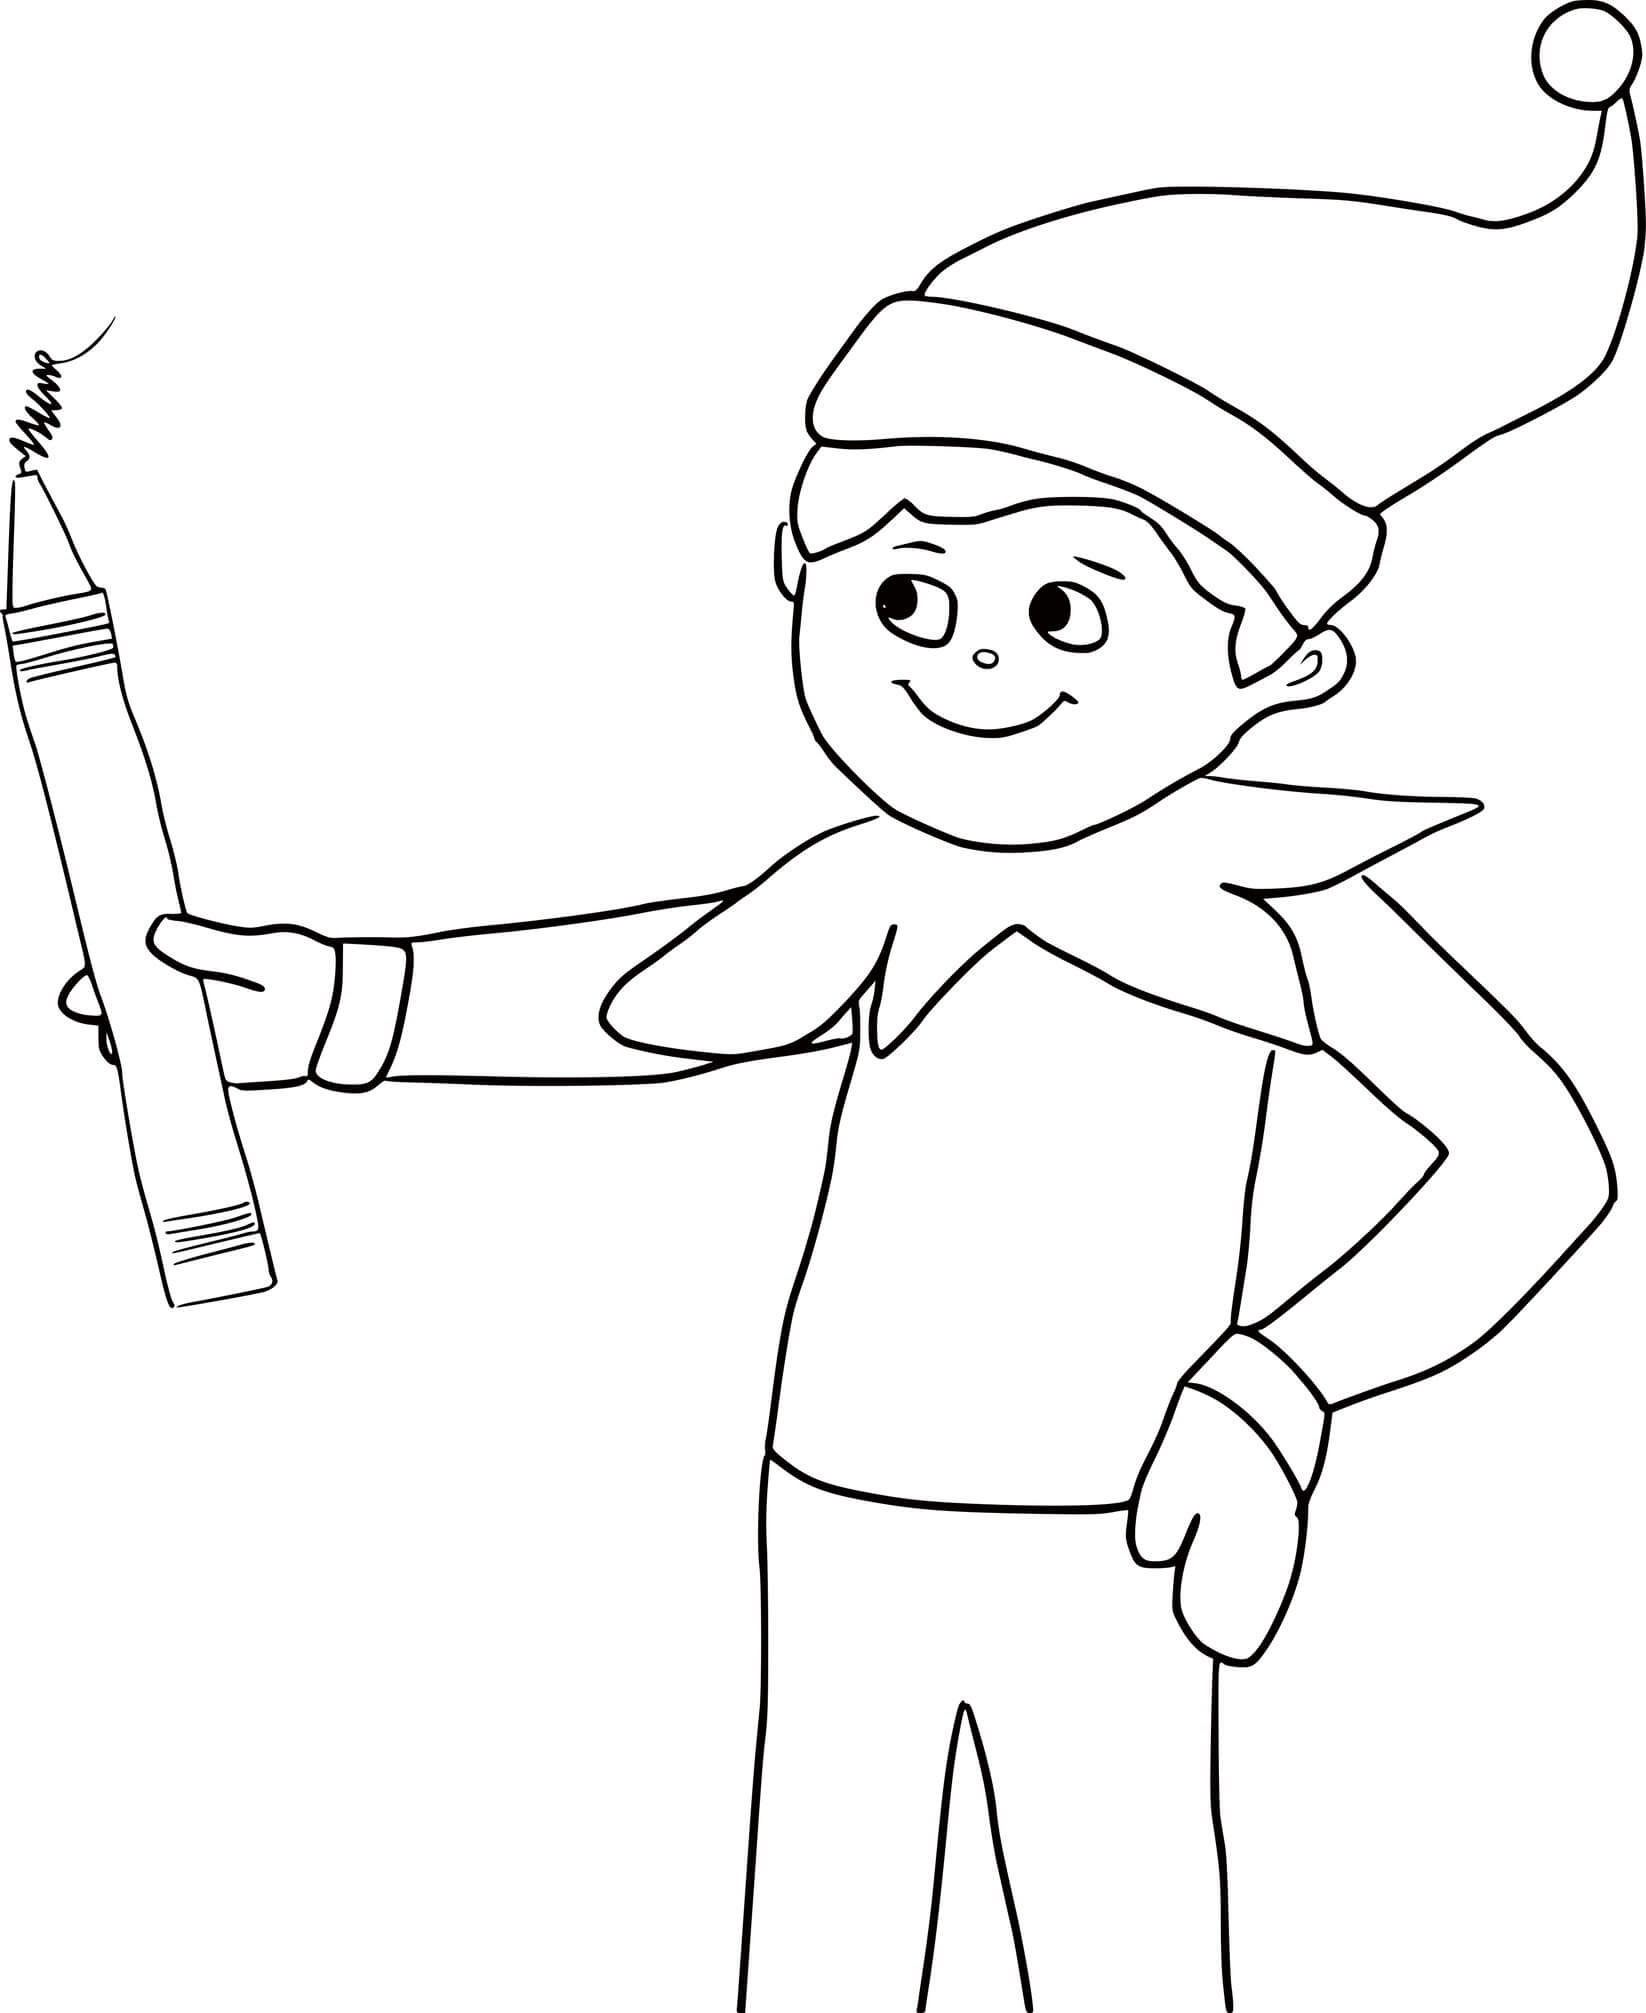 Elf On The Shelf Holds A Pencil Coloring Page